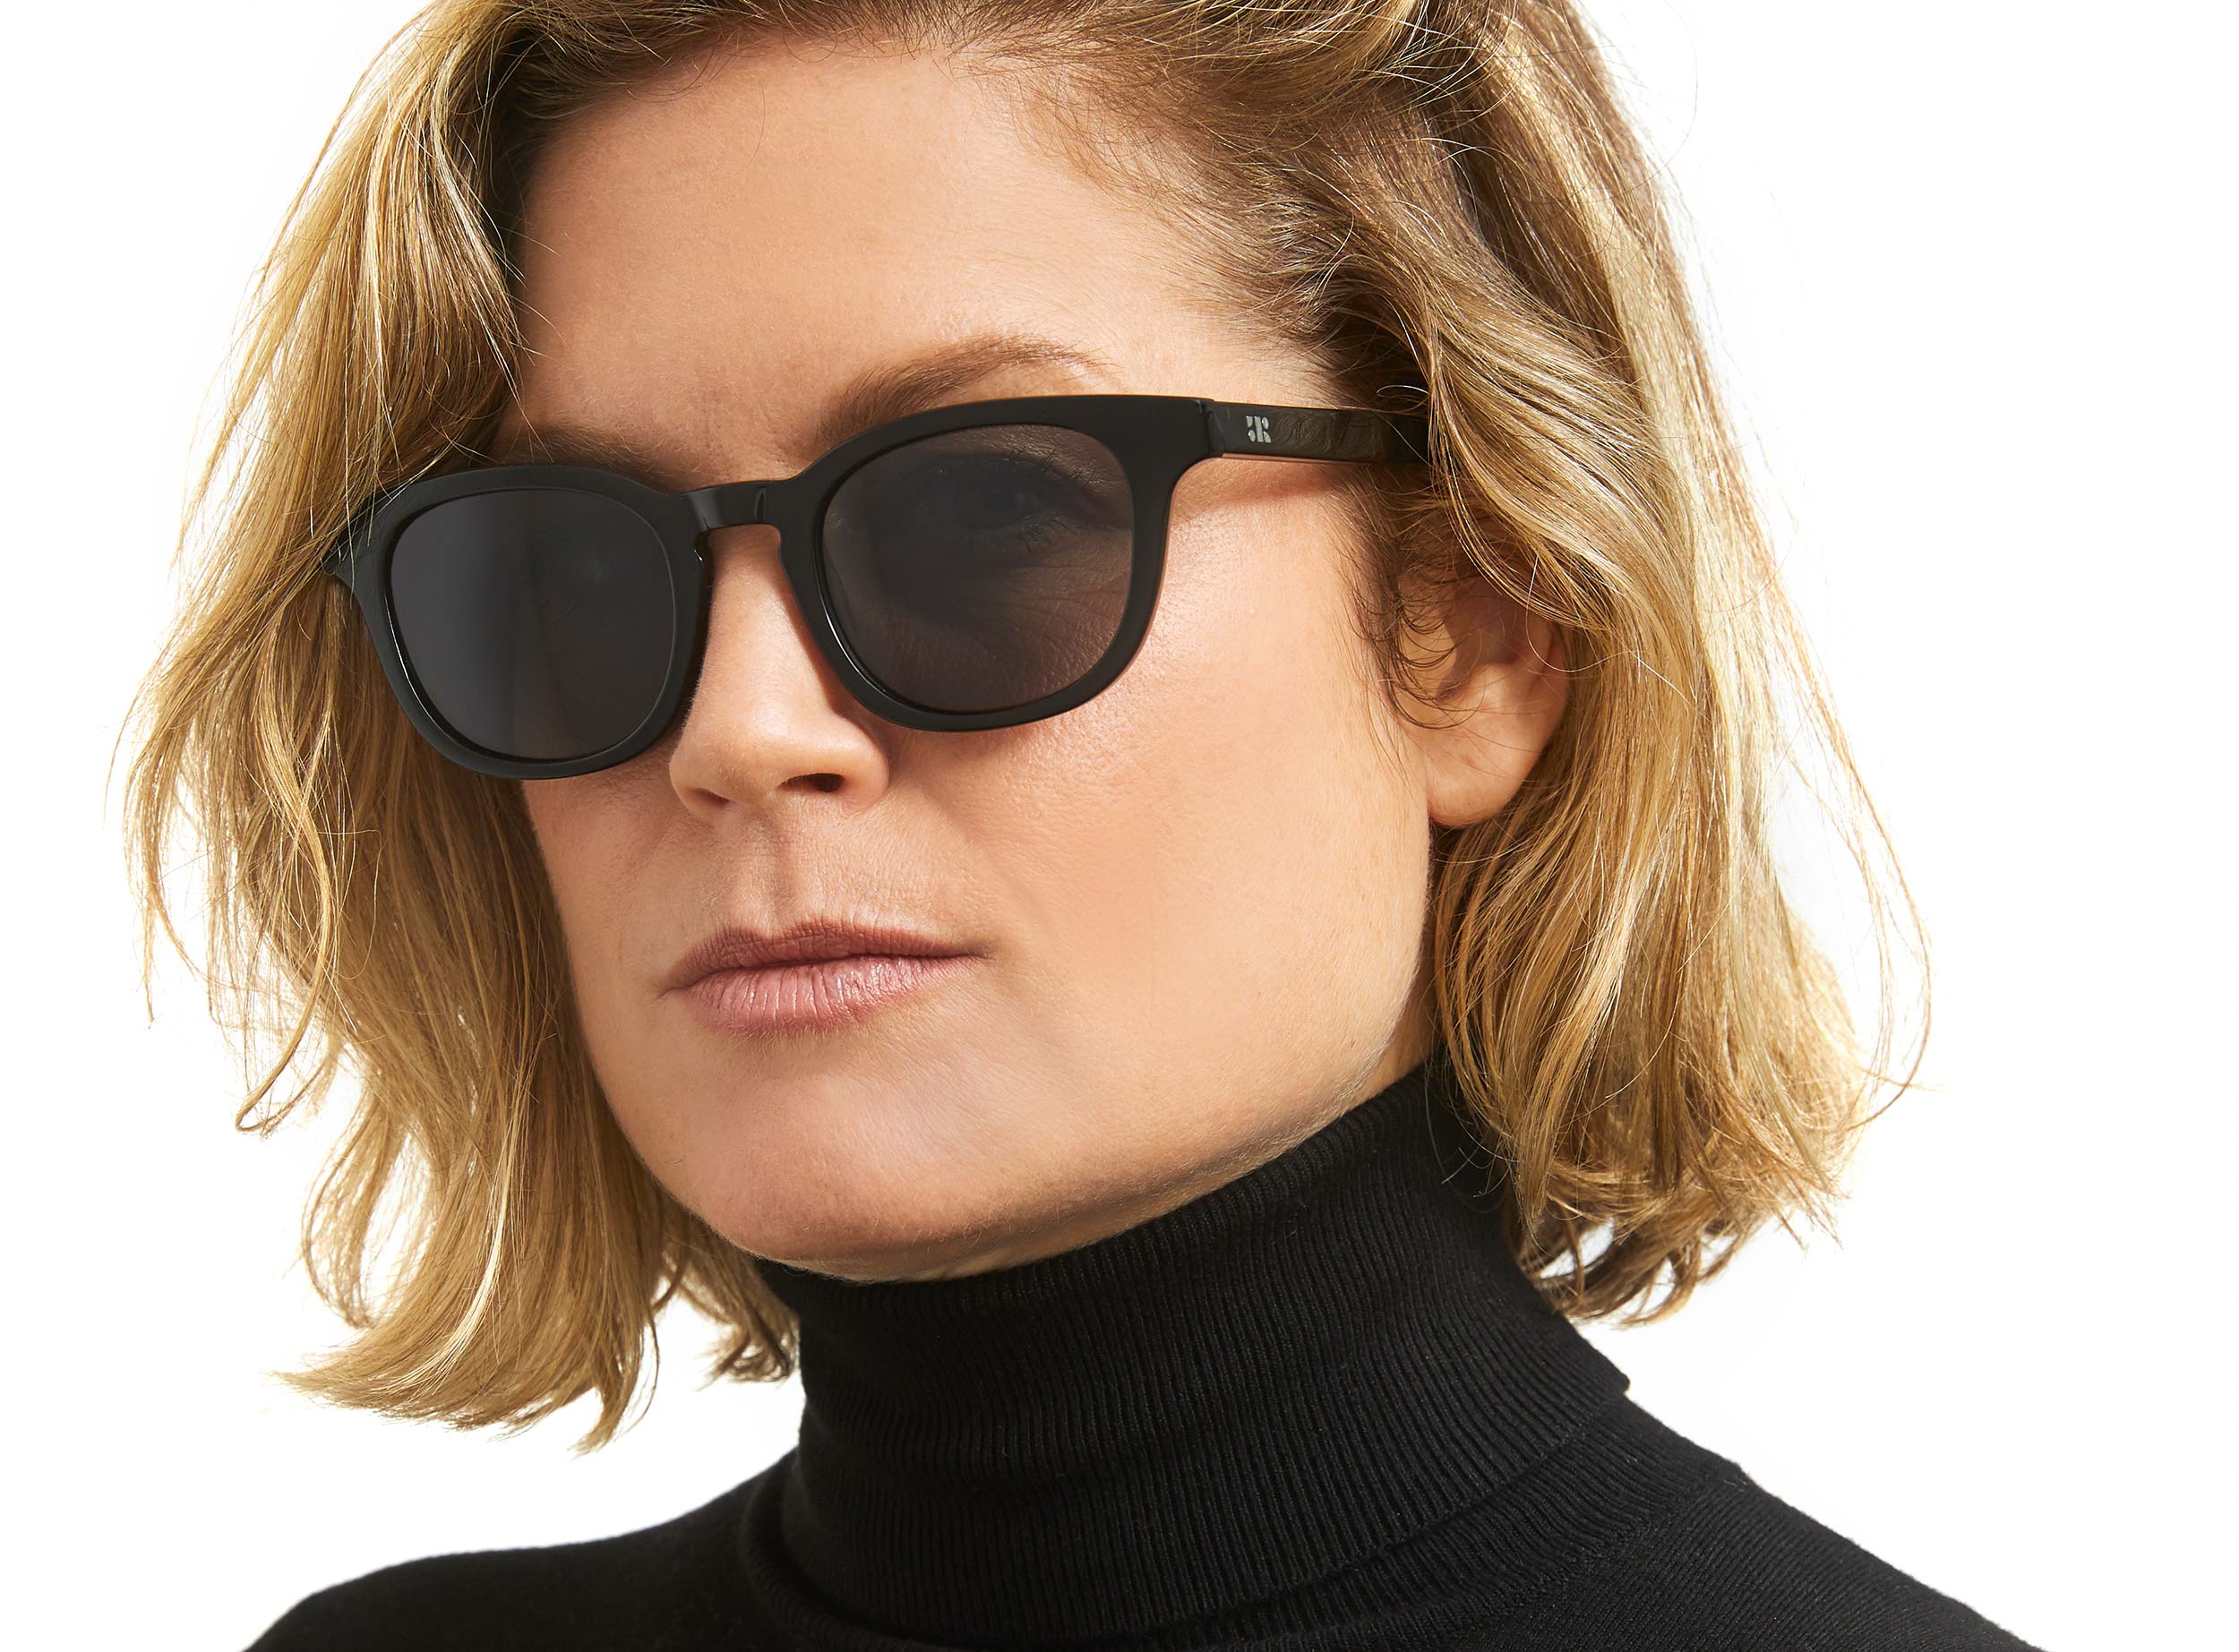 Photo of a man or woman wearing Sinclair Sun Honey Sun Glasses by French Kiwis